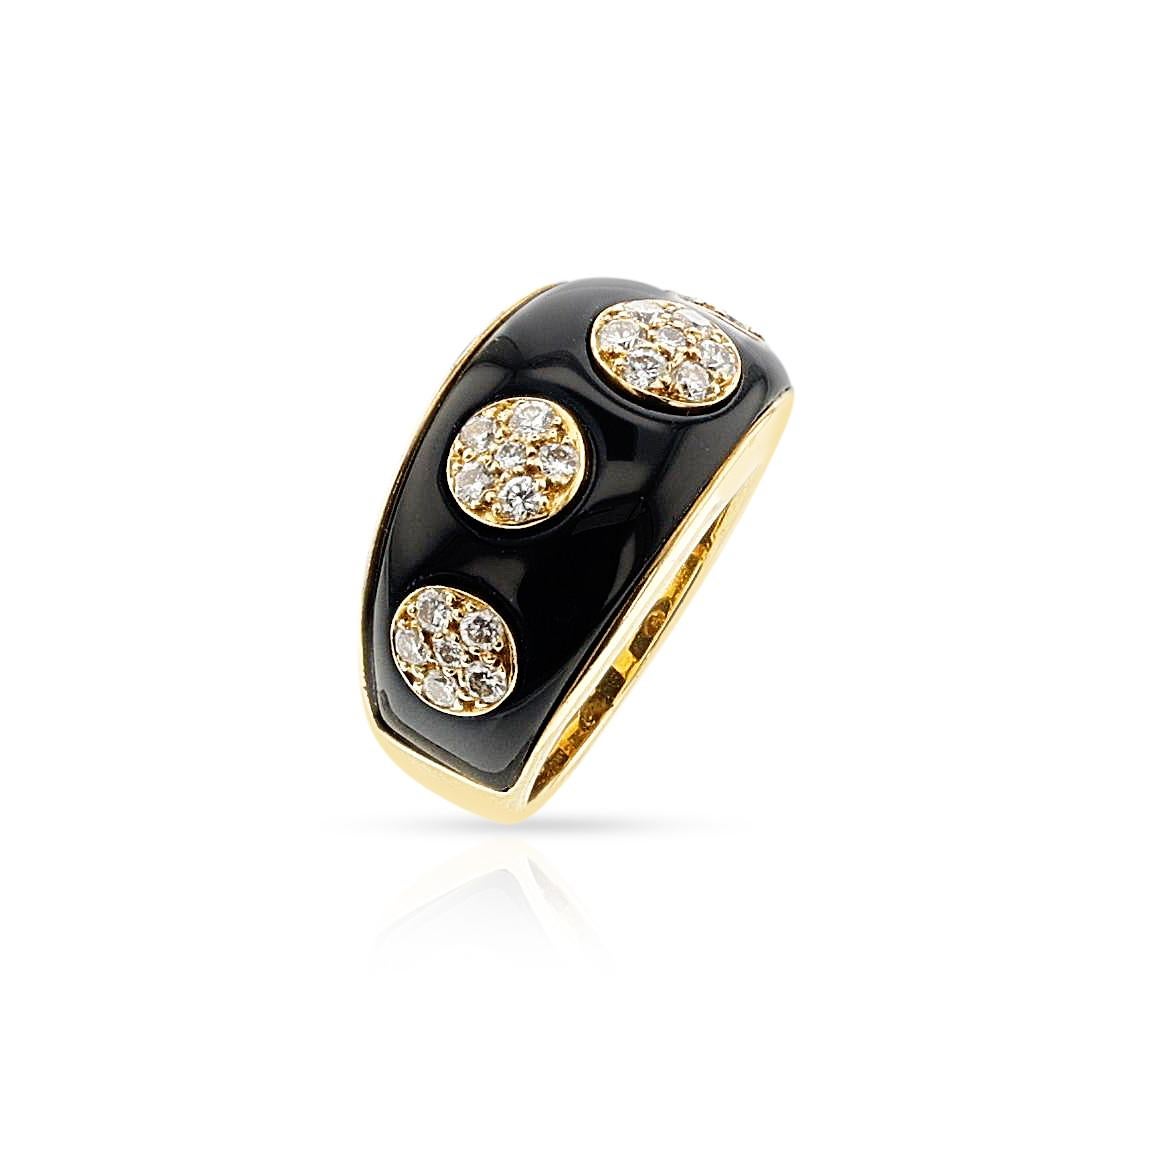 A Van Cleef & Arpels Diamond Flower and Onyx Ring made in 18k Yellow Gold. French marks. The total weight is 11 grams. The Ring size is US 6.25.  

SKU: 1413-DRDJTYJ